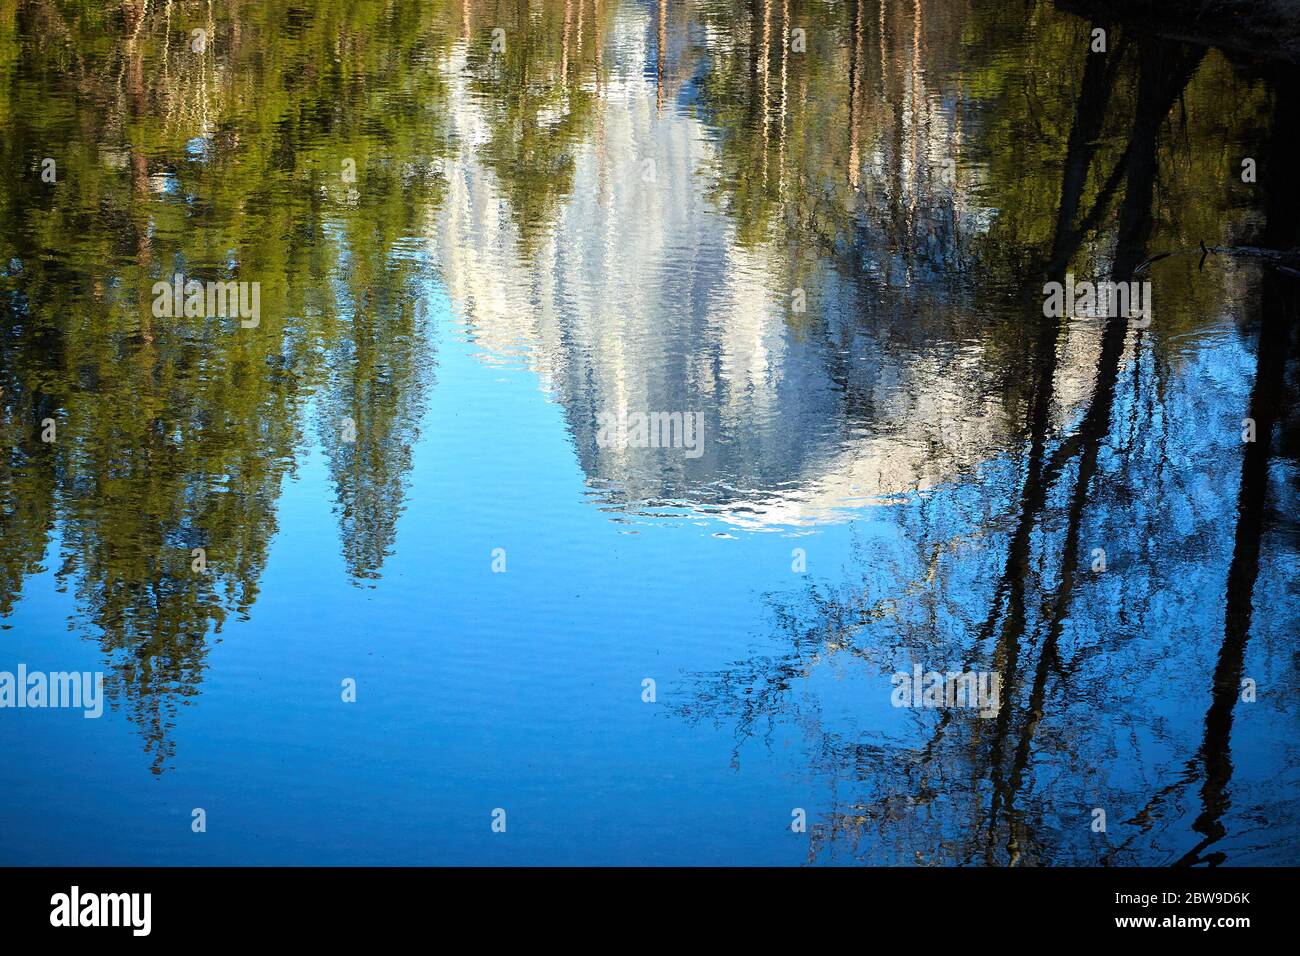 Half Dome Mountain Reflected in Still Water at Yosemite National Park Stock Photo